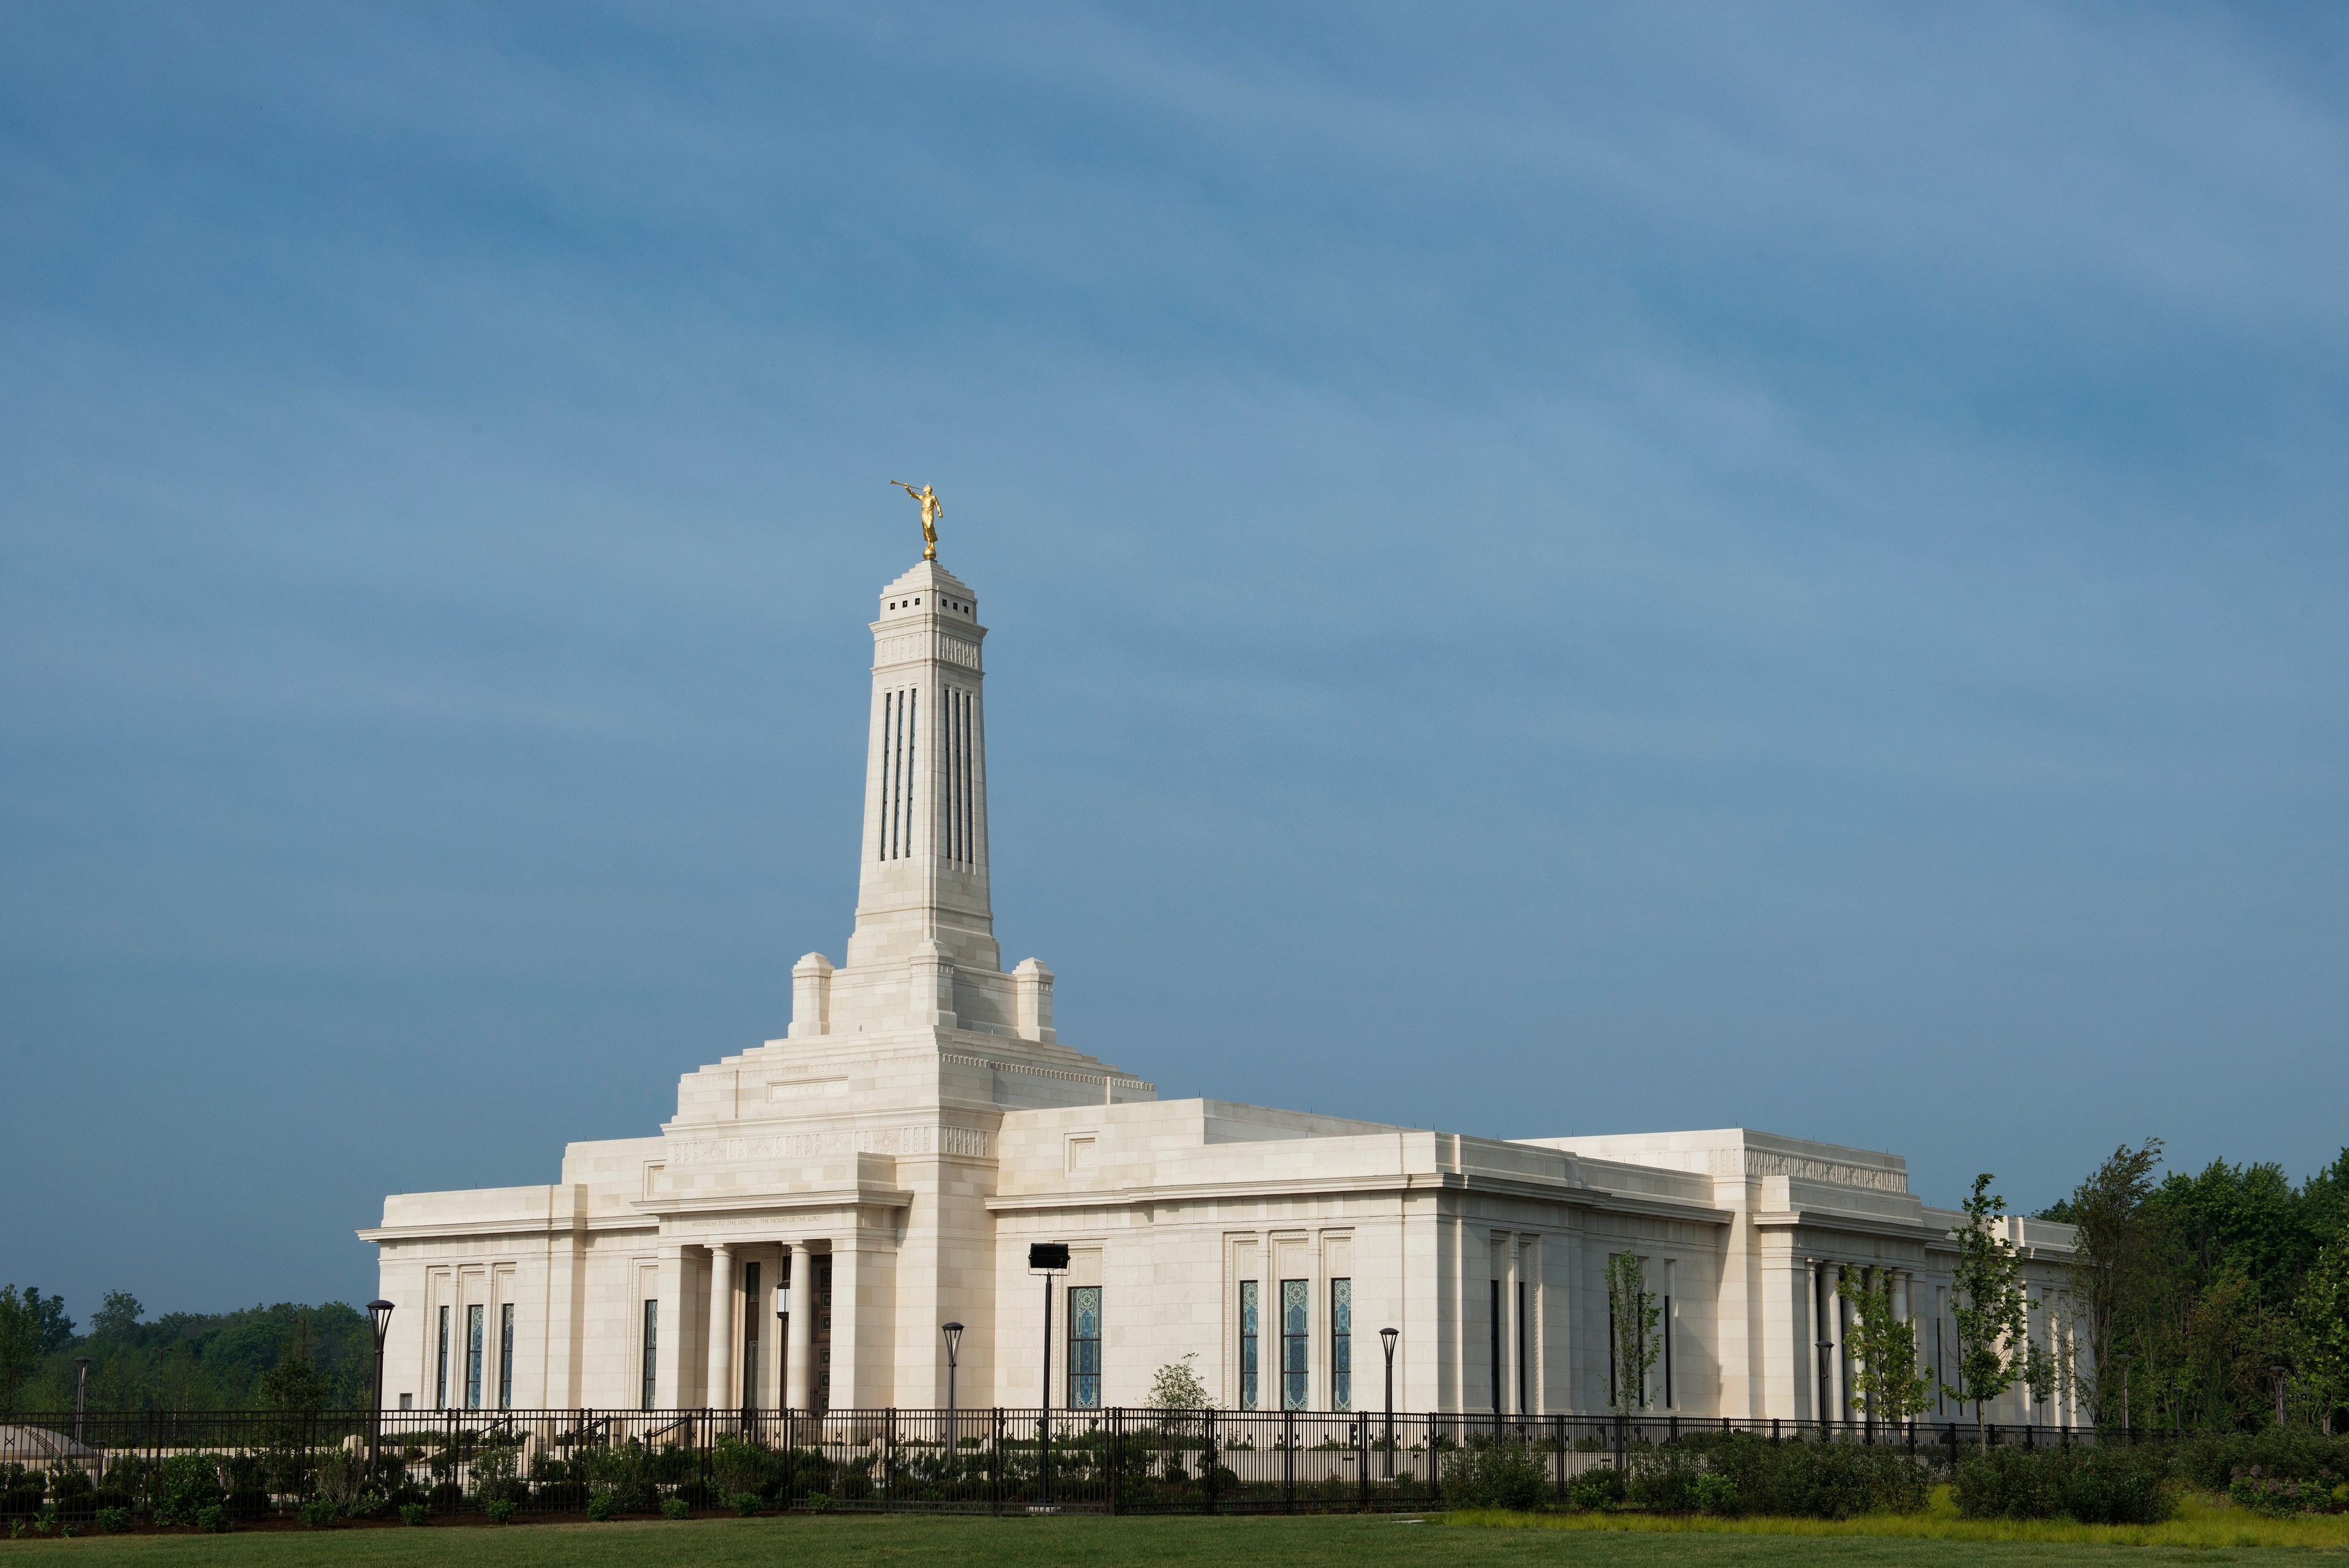 The Indianapolis Indiana Temple and grounds in the daytime.